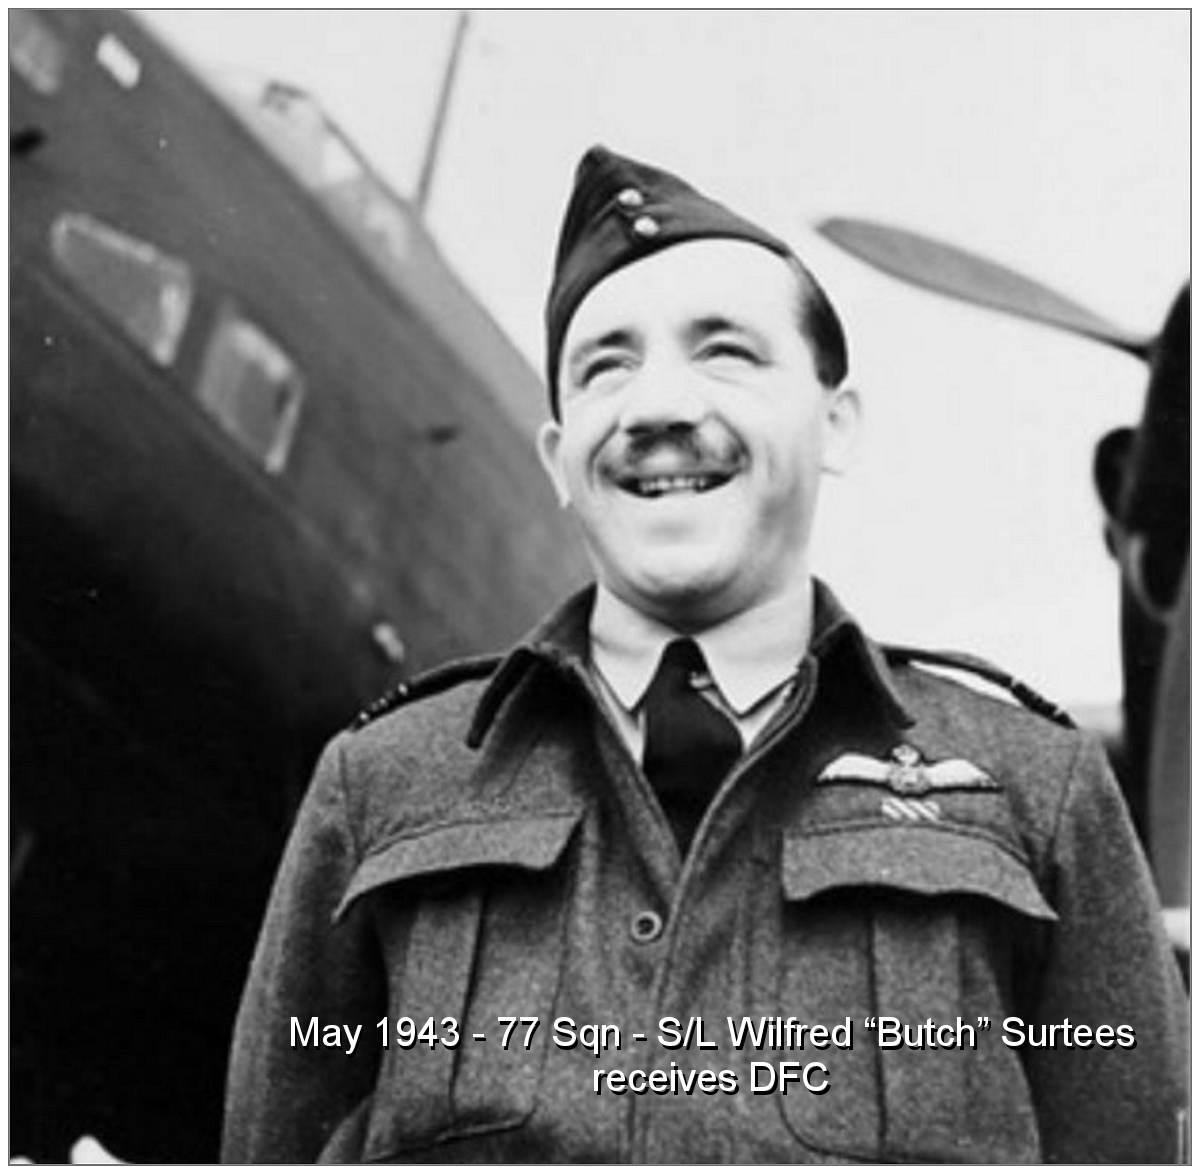 Squadron Leader - Pilot - Wilfred 'Butch' Surtees - 14 May 1943 - DFC